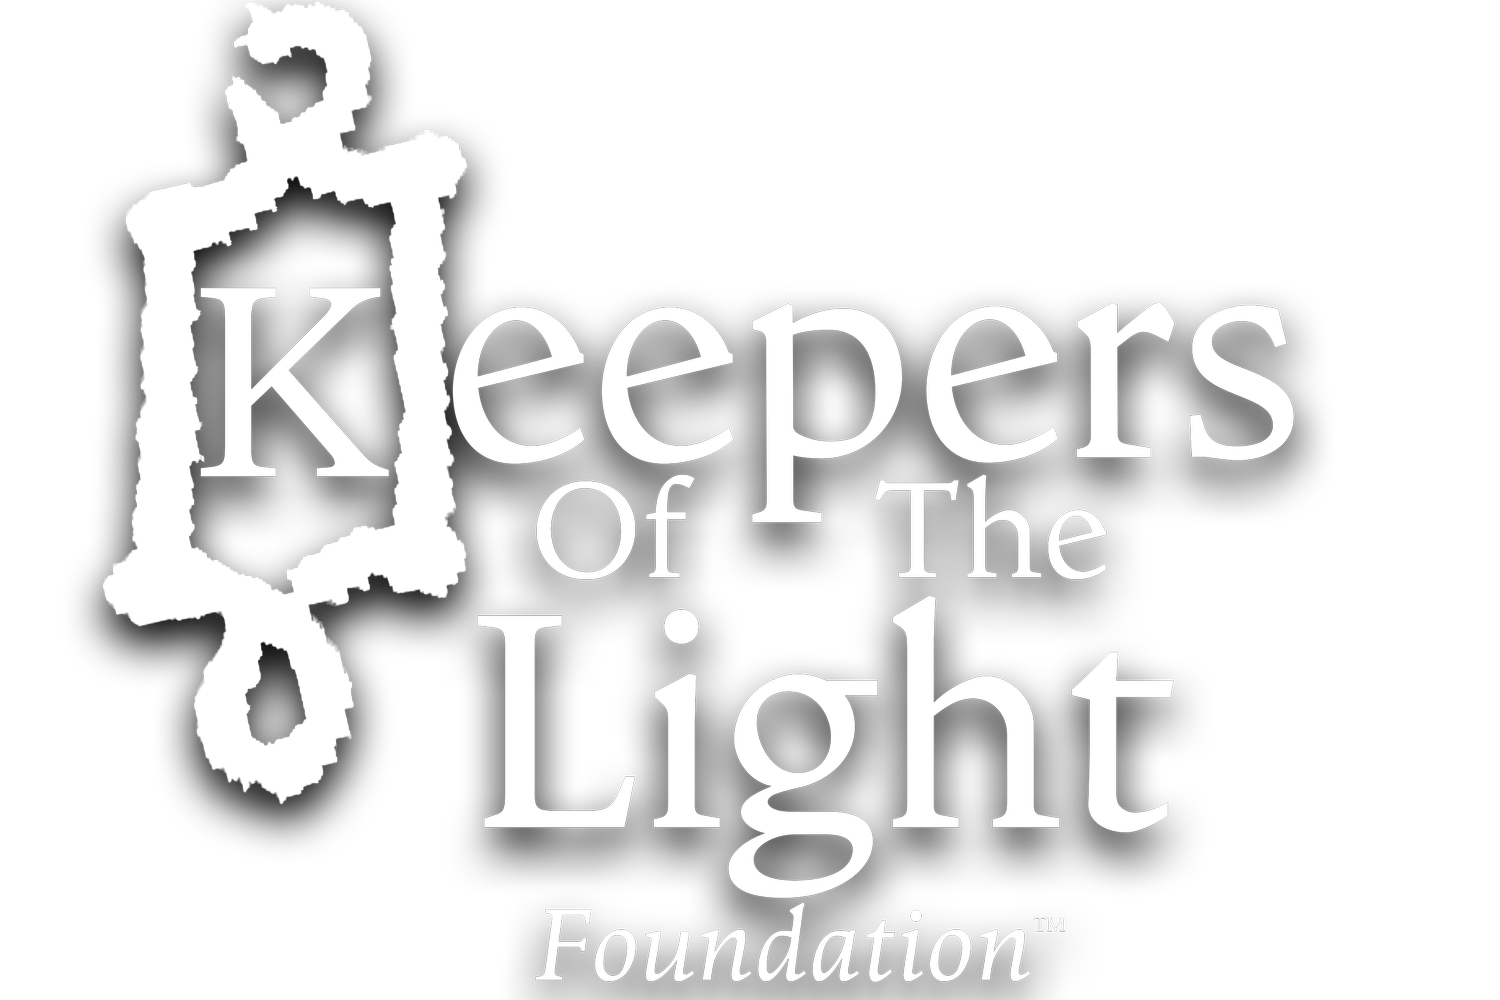 Keepers of the Light Foundation